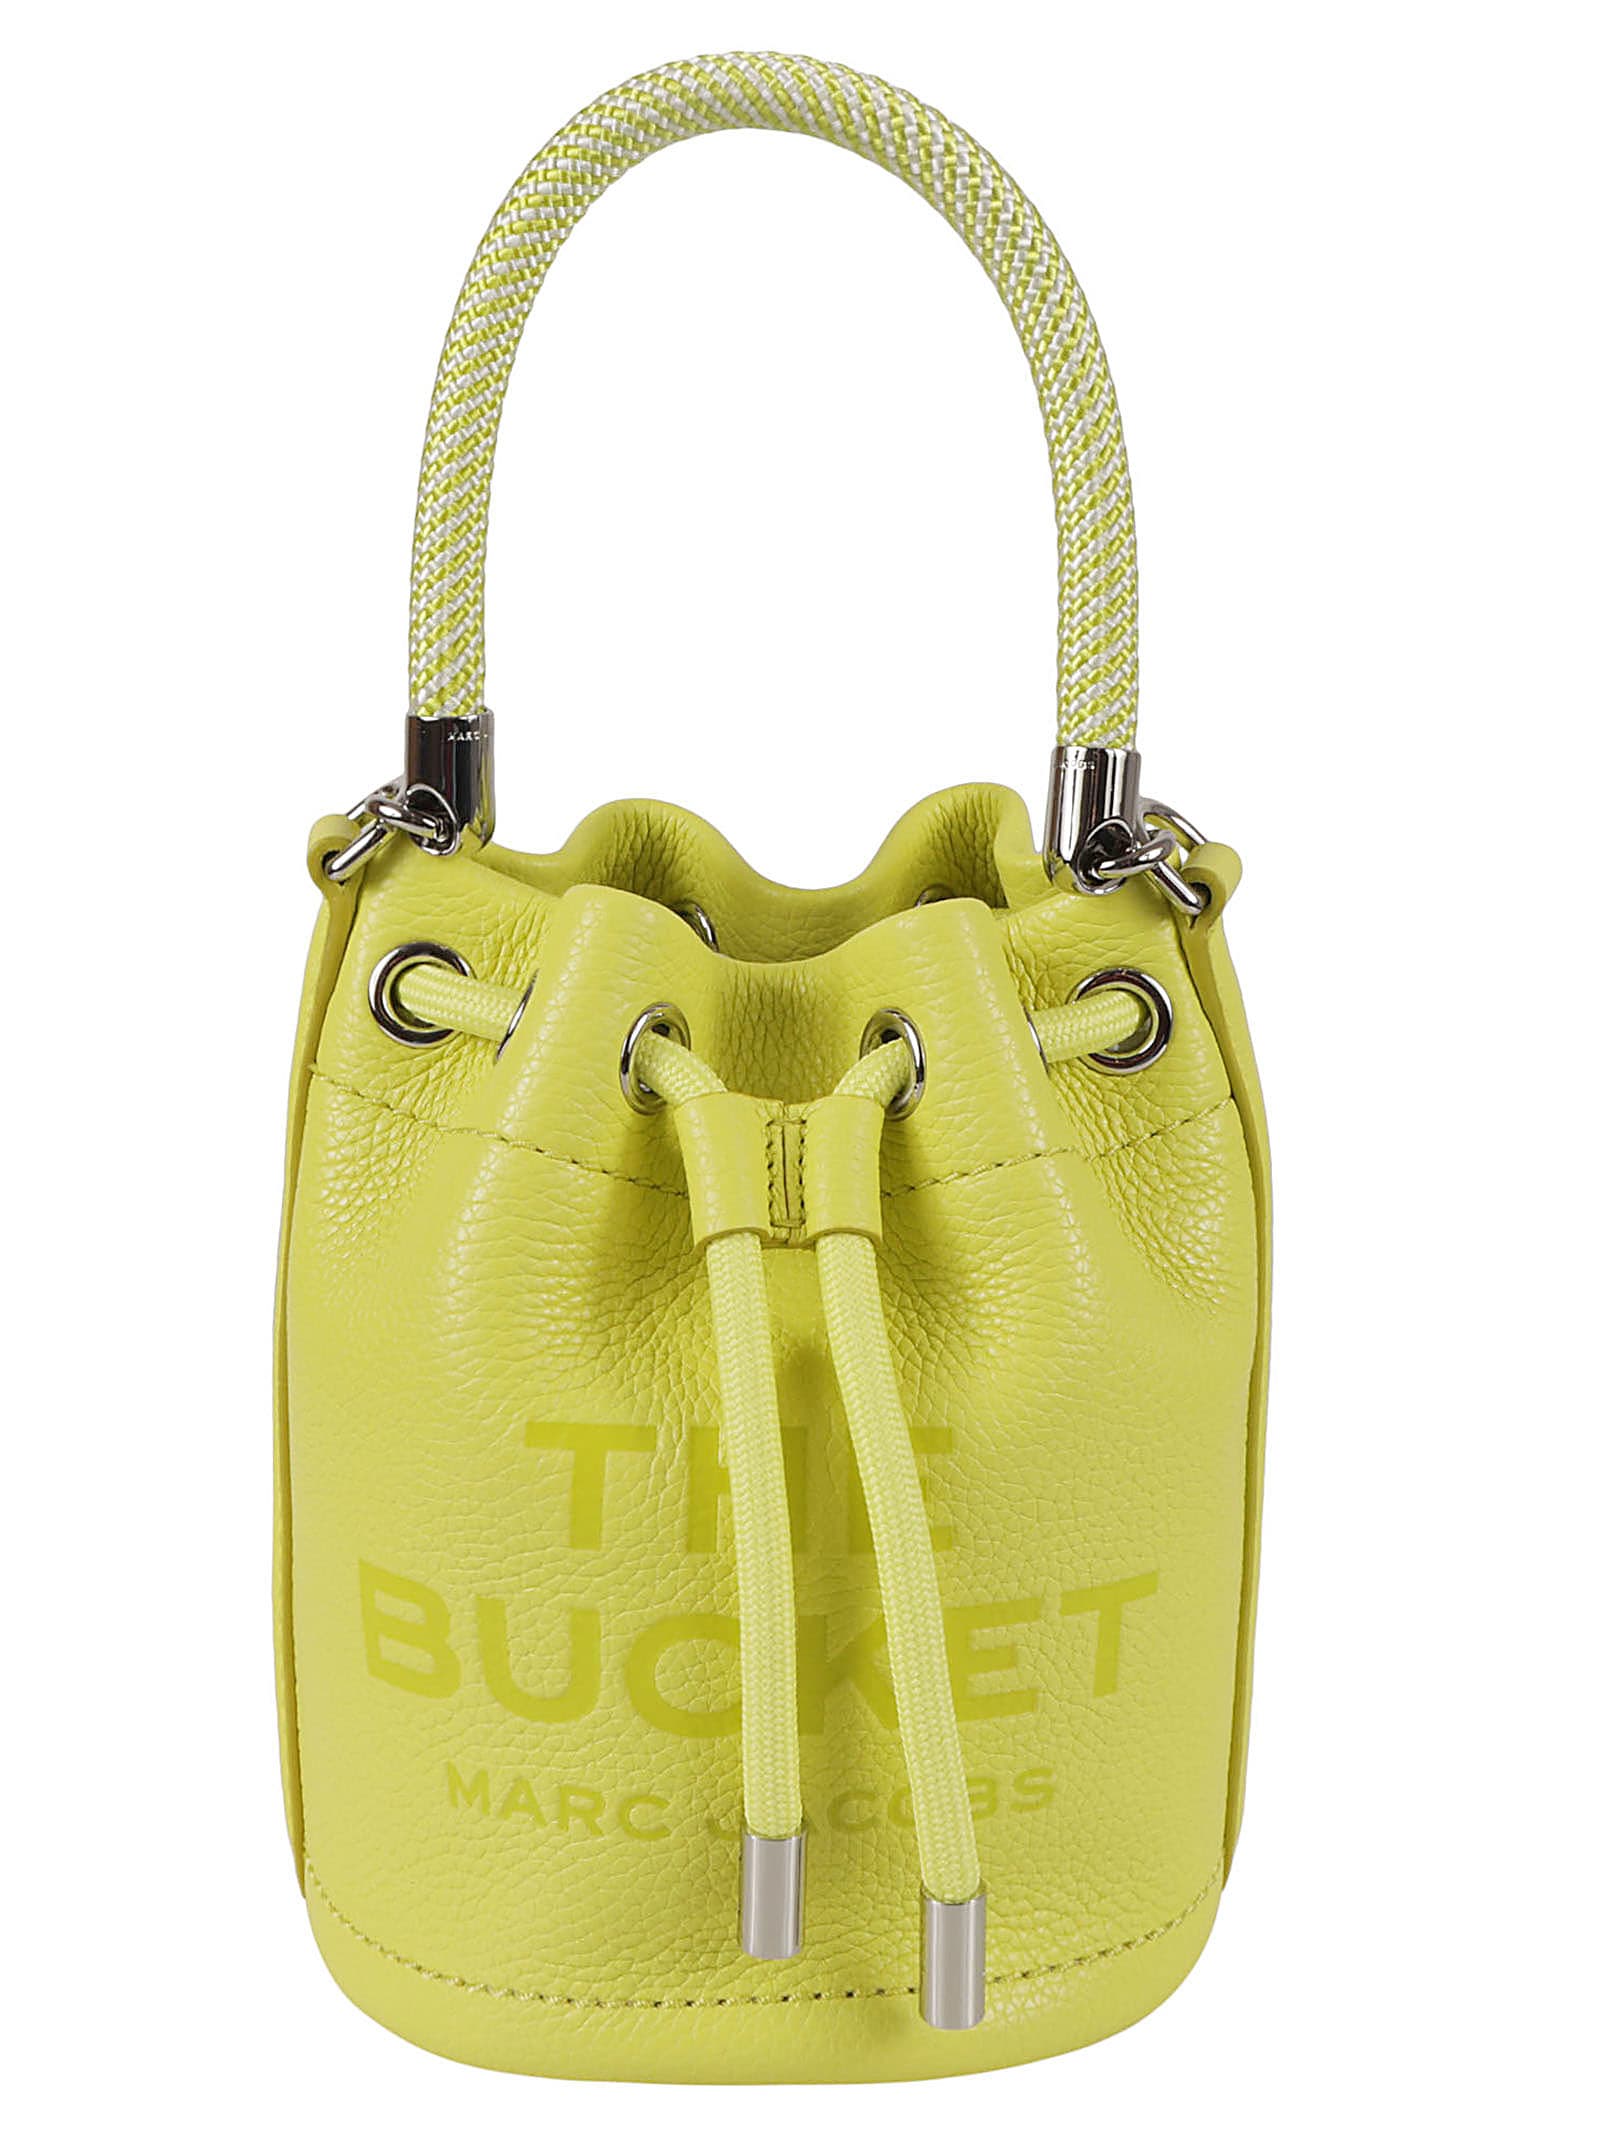 Marc Jacobs The Bucket Bucket Bag In Limoncello